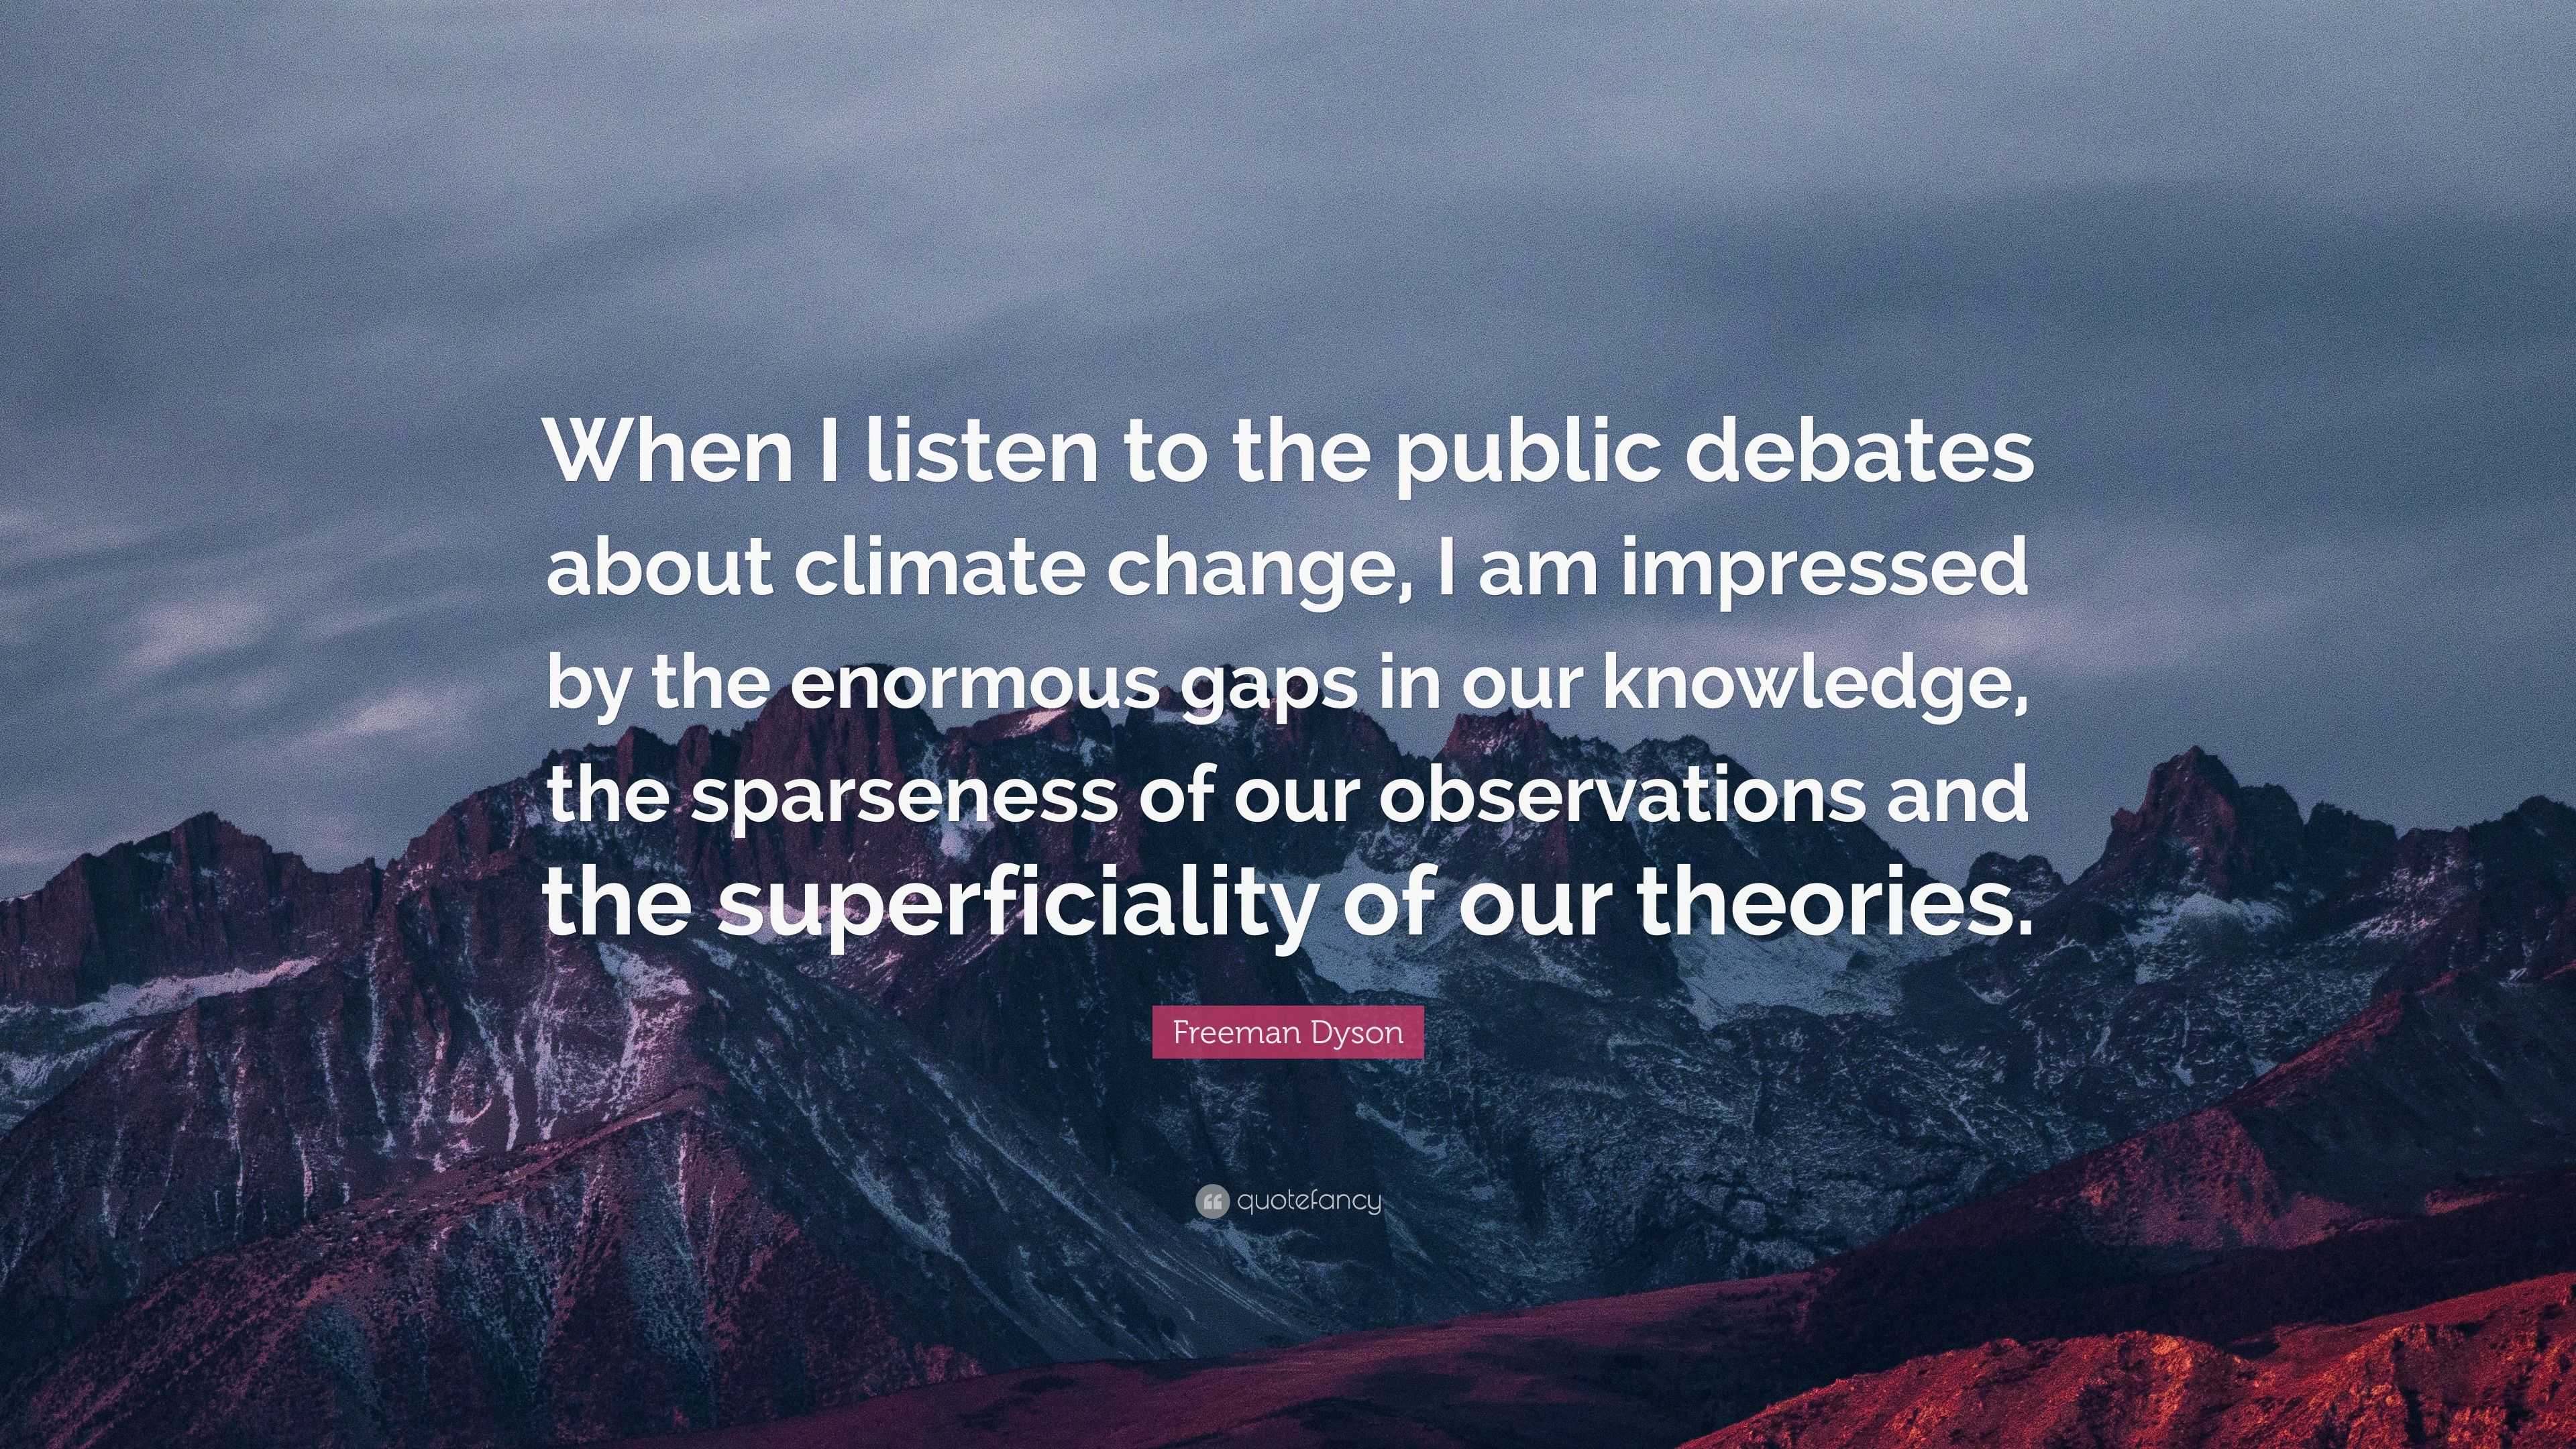 Telemacos jomfru demonstration Freeman Dyson Quote: “When I listen to the public debates about climate  change, I am impressed by the enormous gaps in our knowledge, the spar...”